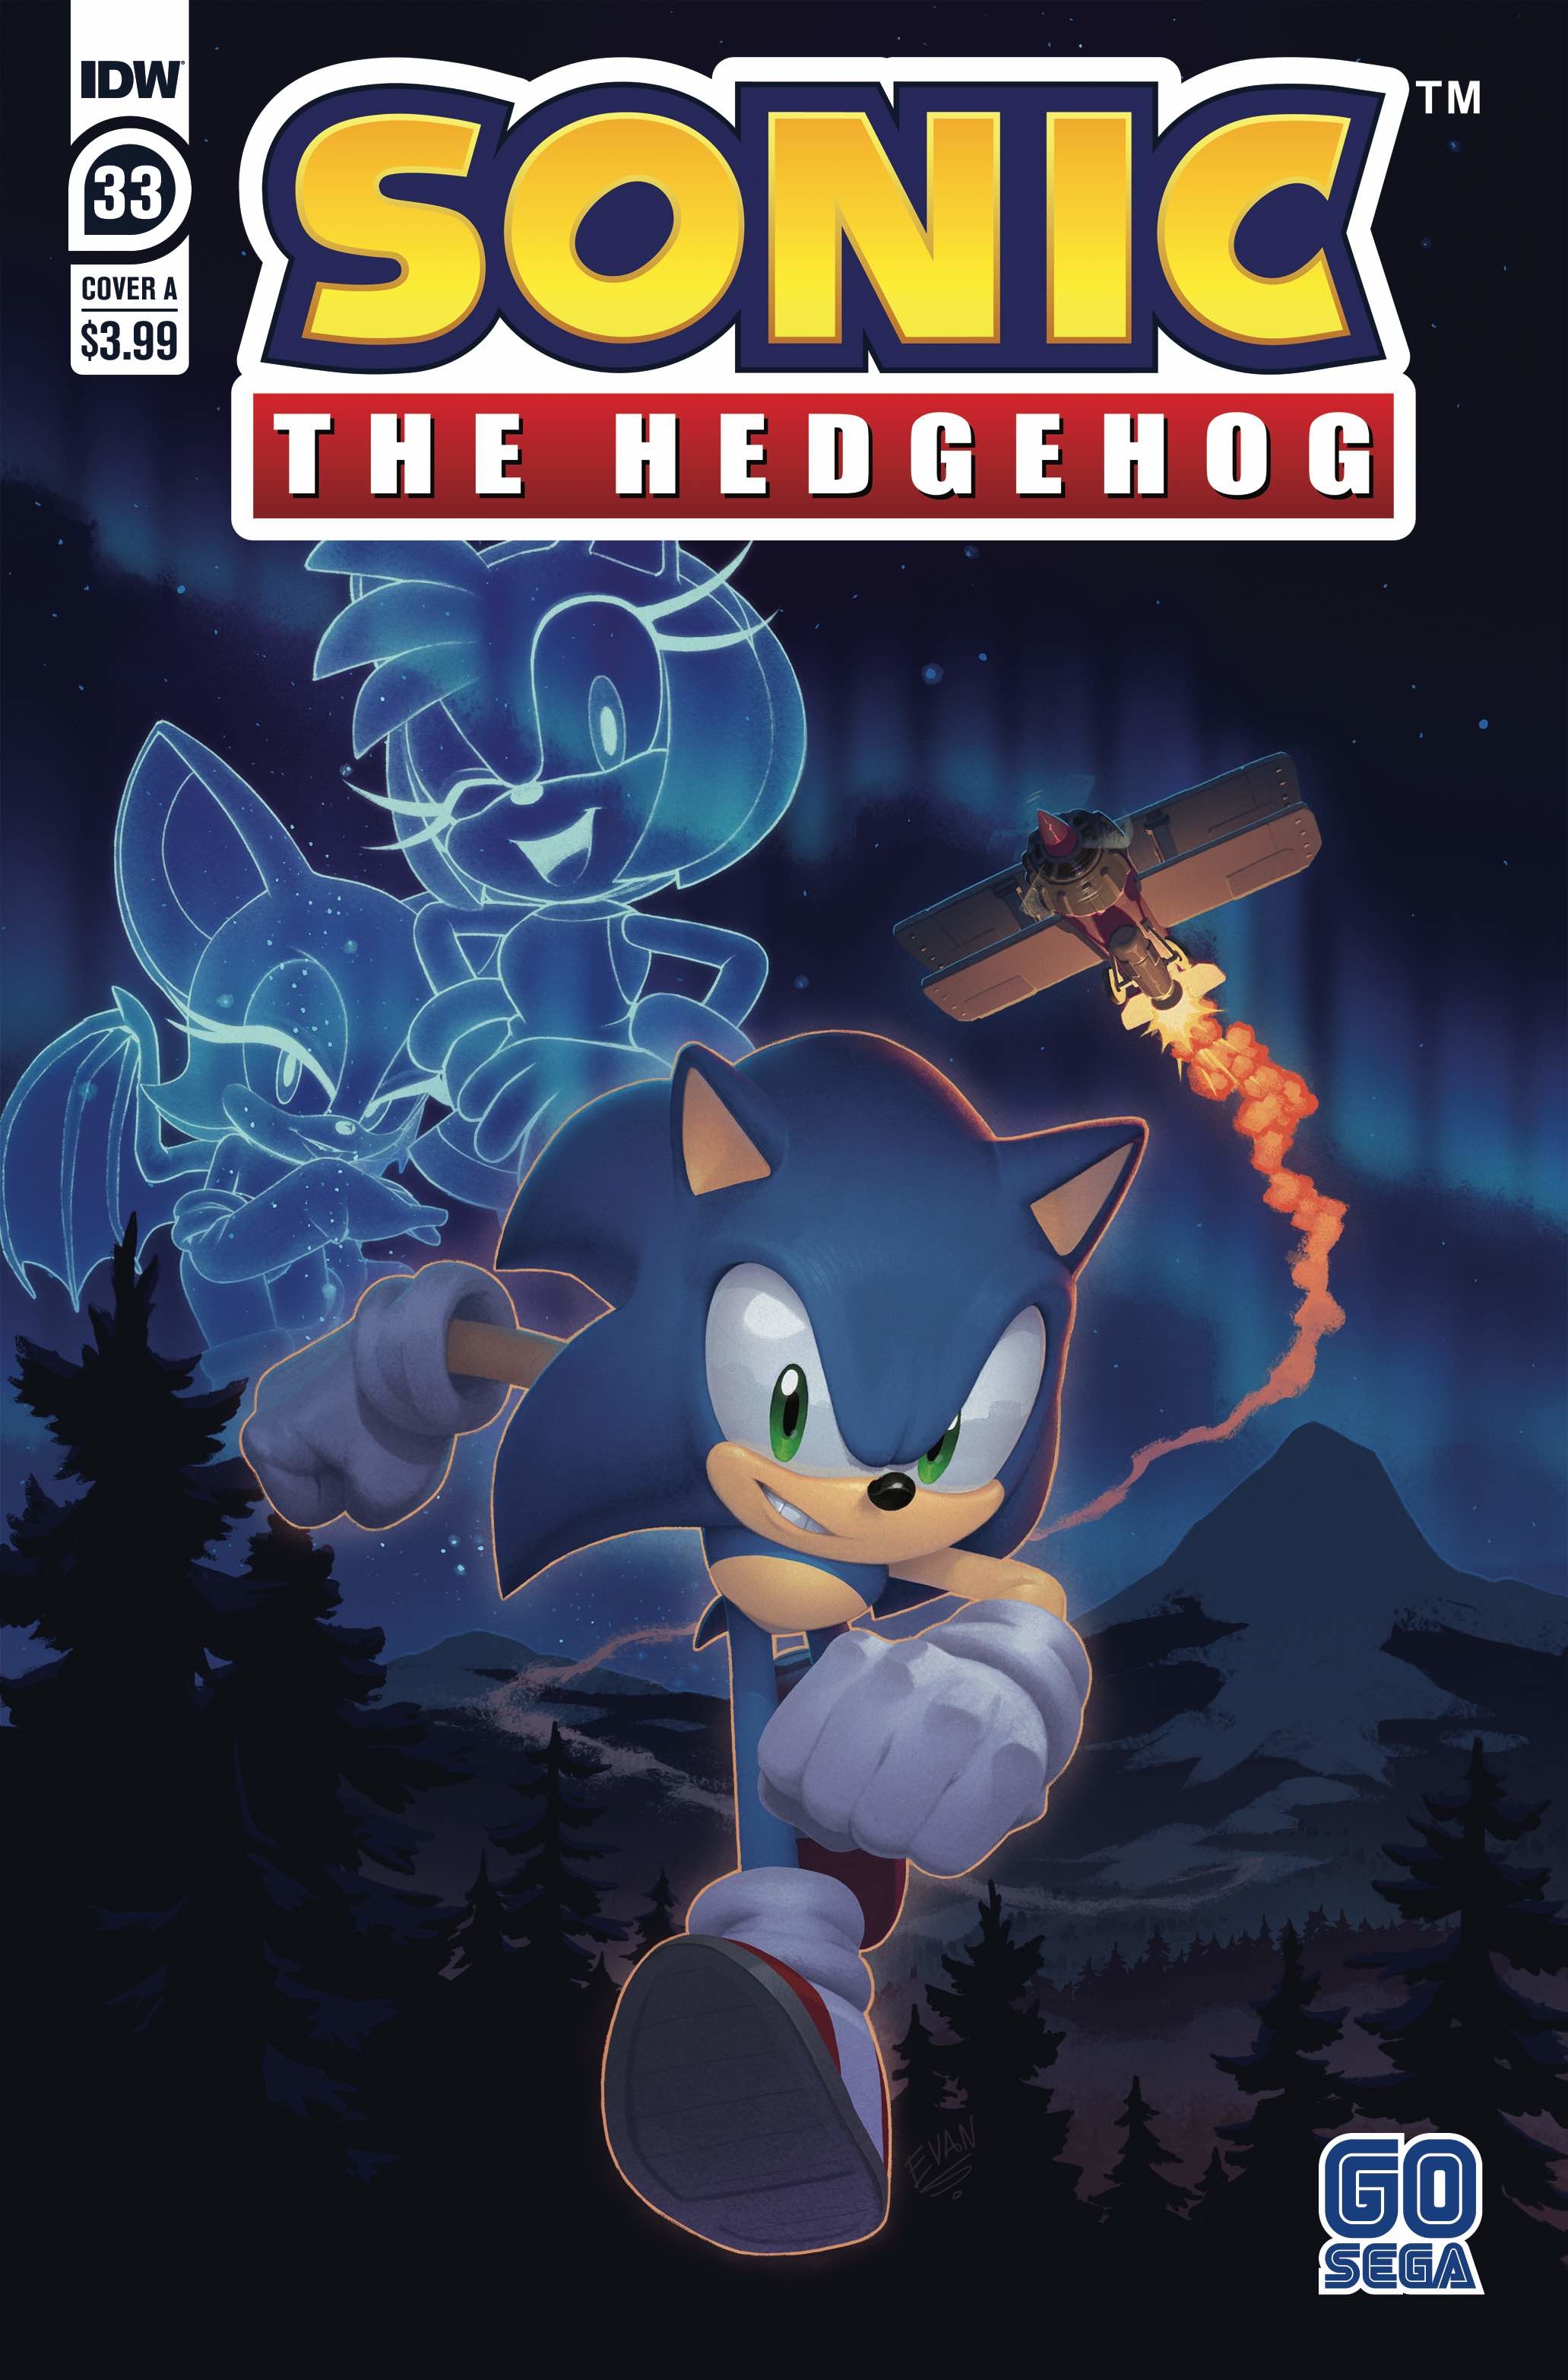 Sonic the Hedgehog #33 Cover A Stanley